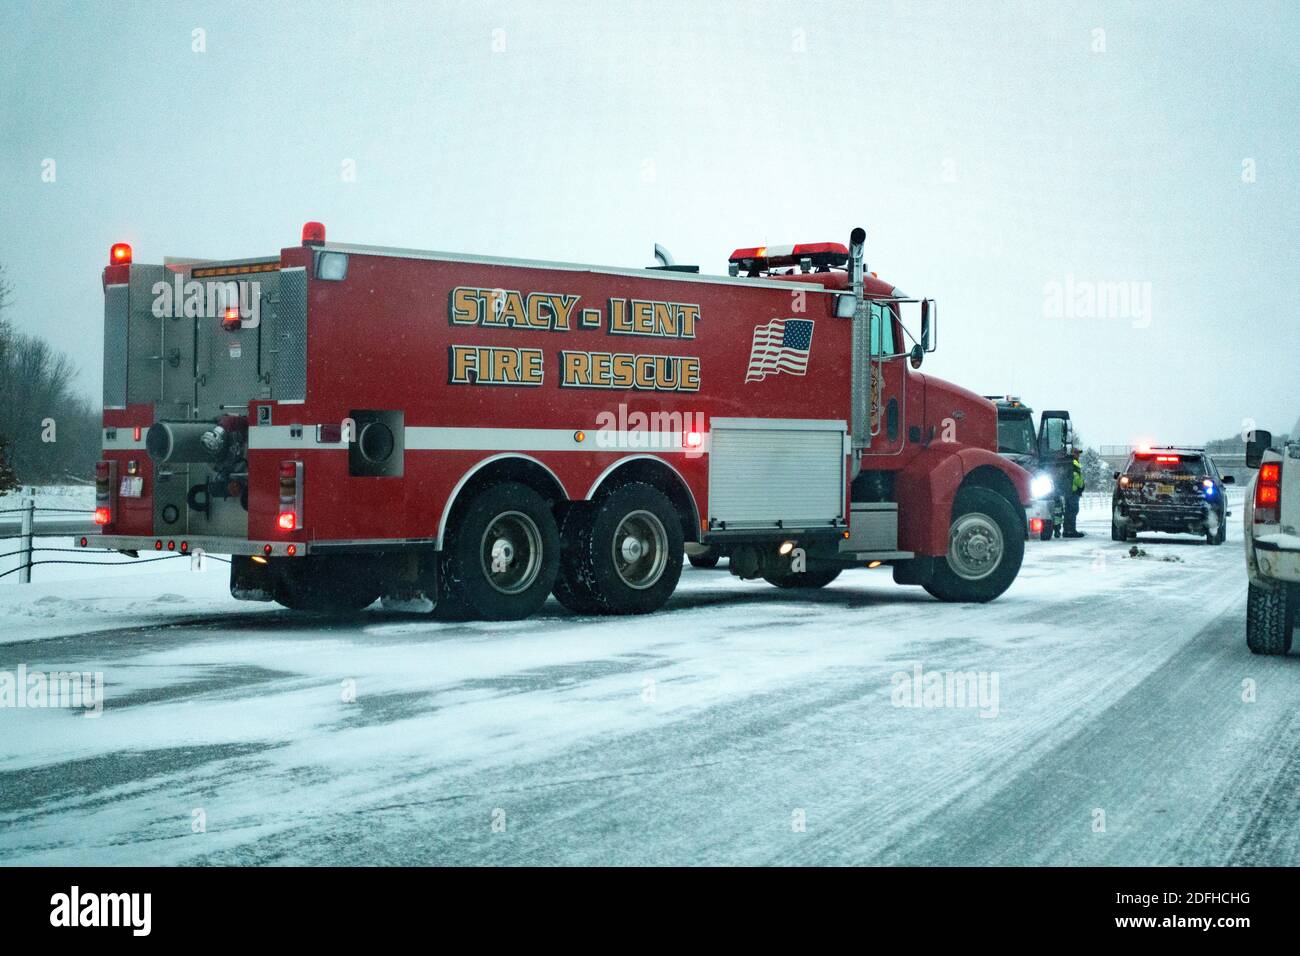 Fire truck arrives at the scene of an accident due to slippery roads on I-35 Freeway Stacy Minnesota MN USA Stock Photo